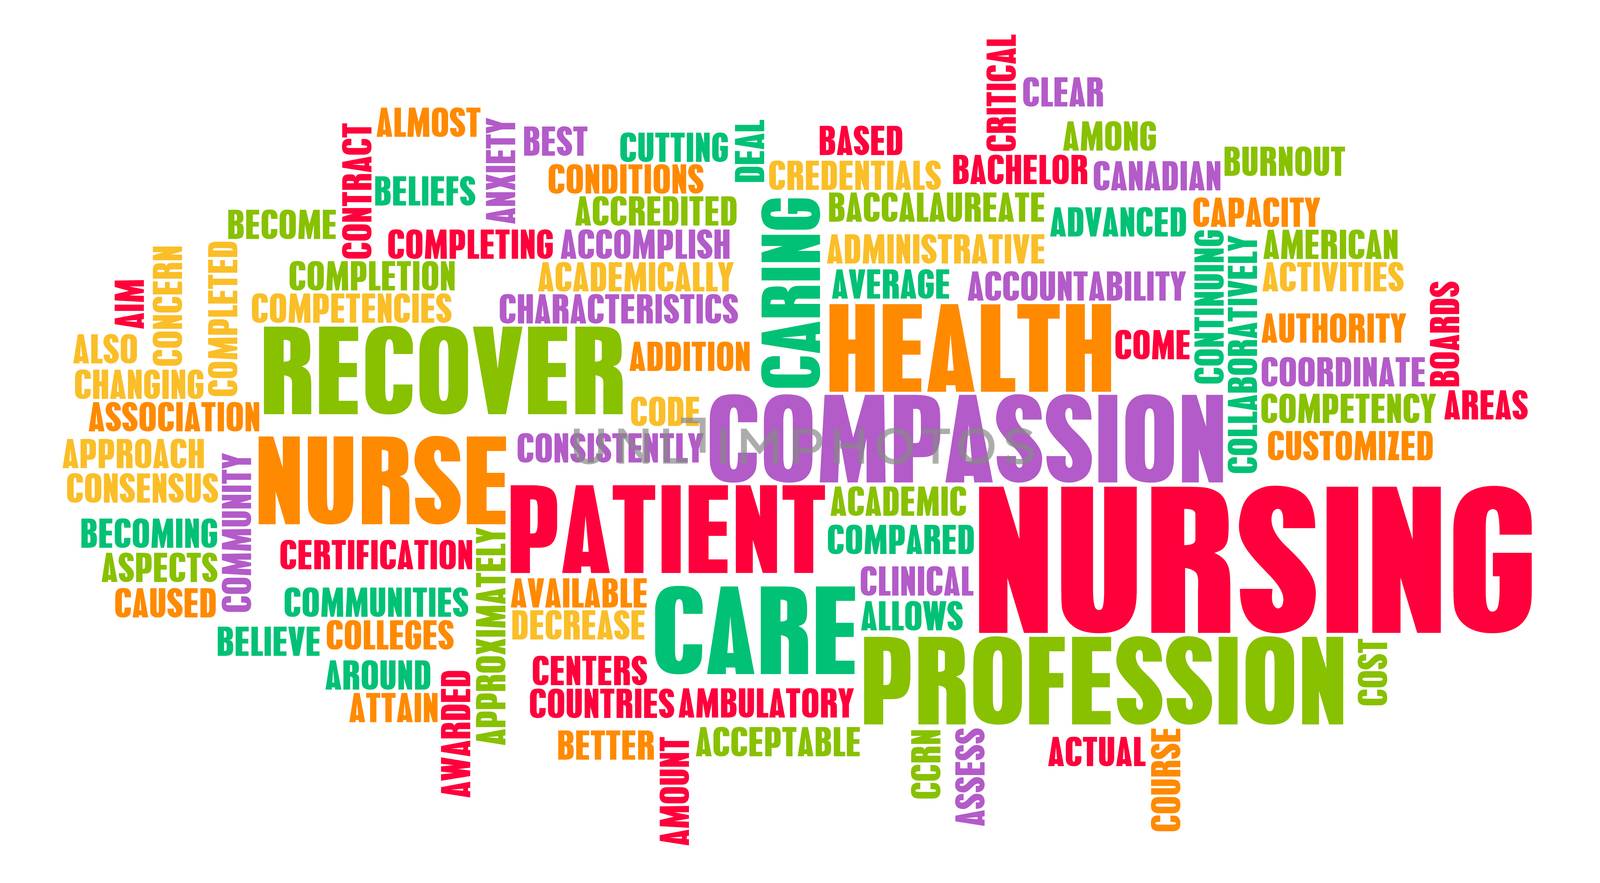 Nursing as a Medical Profession and Career